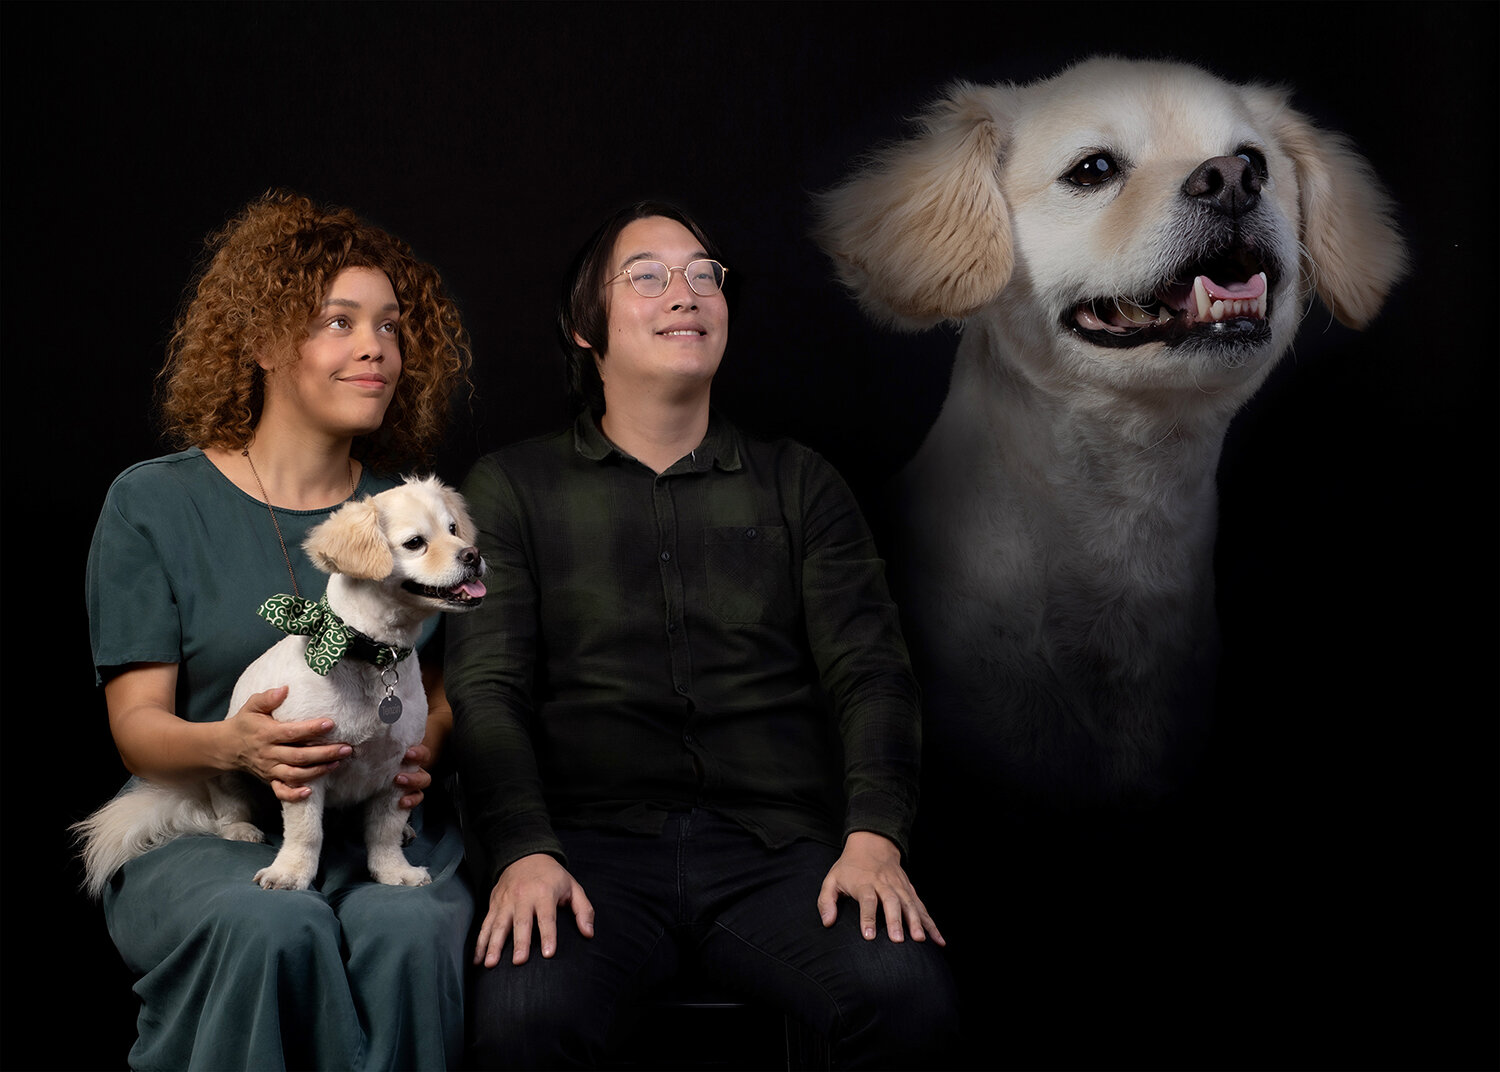 Couples portrait with dog by danielle spires